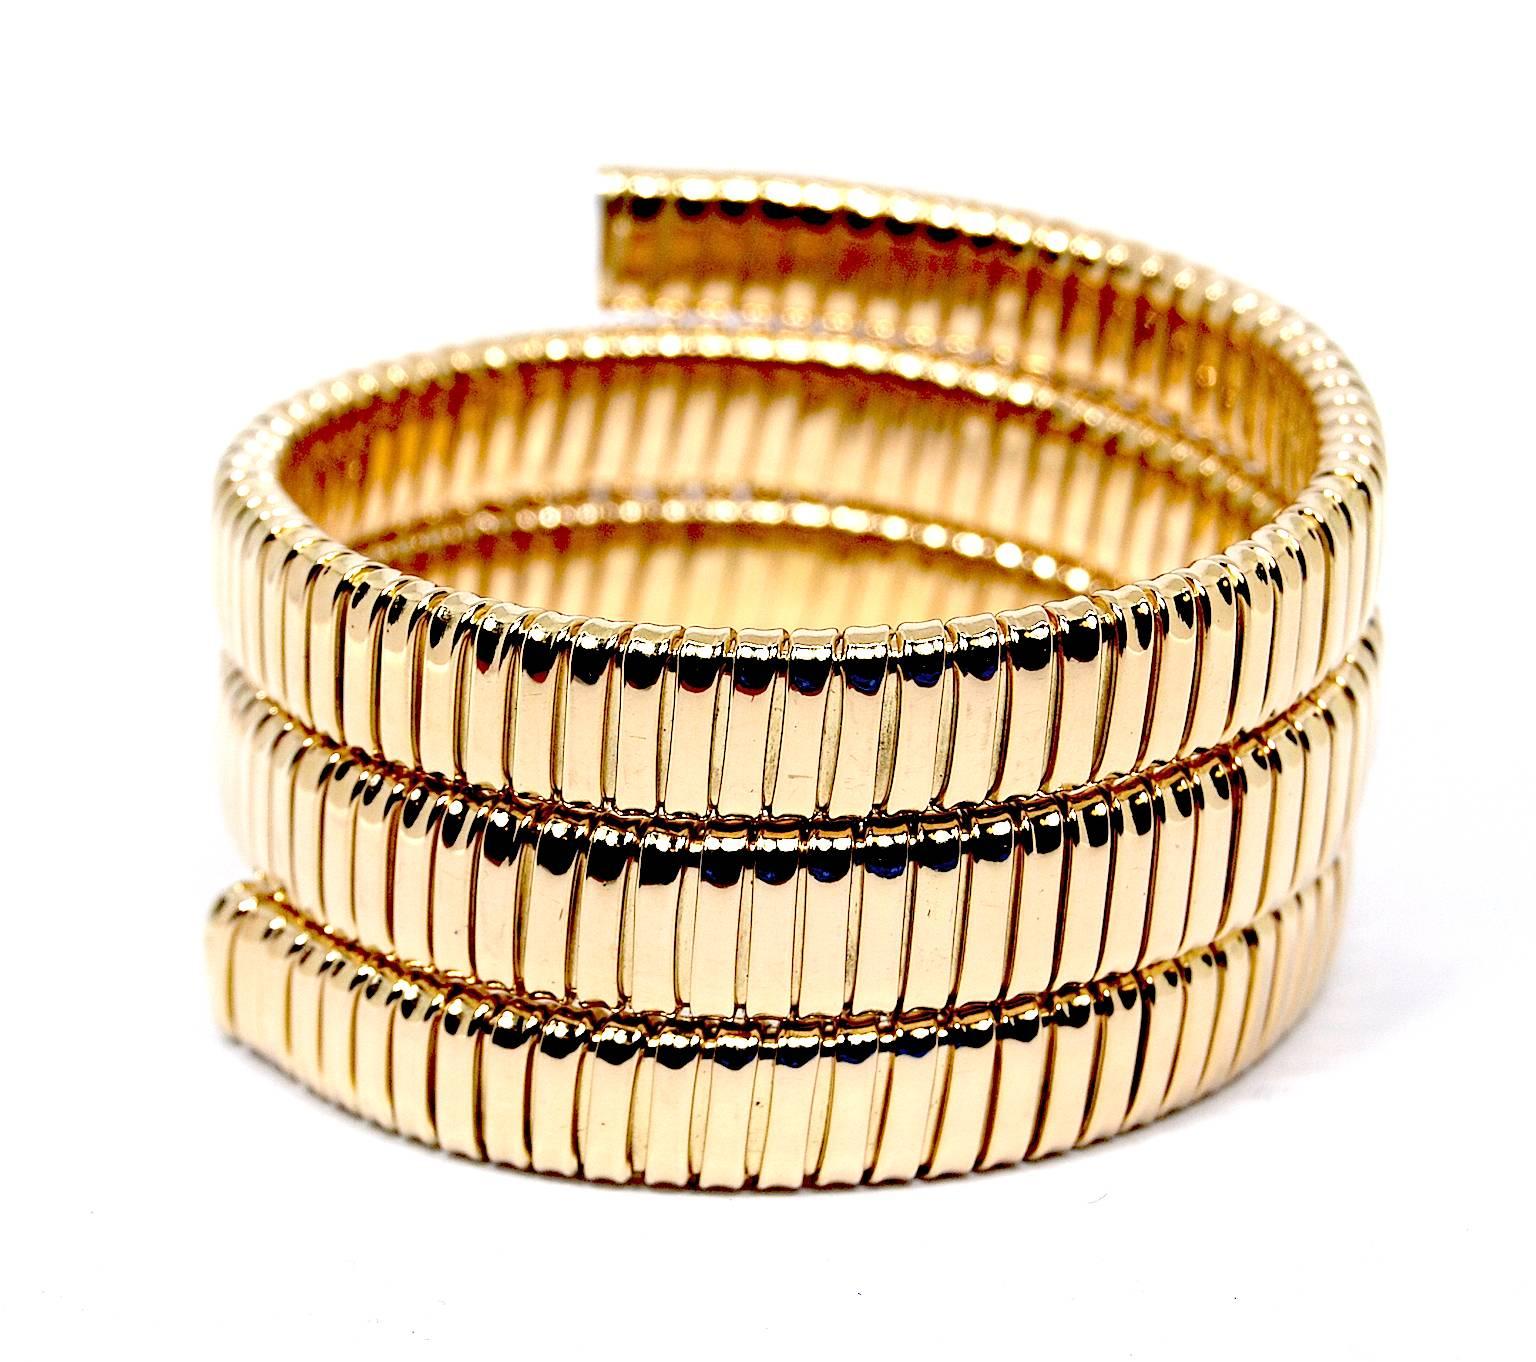 Carlo Weingrill tubogas snake bracelet in 18k yellow gold. This bracelet is completely handmade in Italy in our atelier. Inside there is a steel spring that permit you to easily wear it as a snake over your arm.
We can produce it also in different